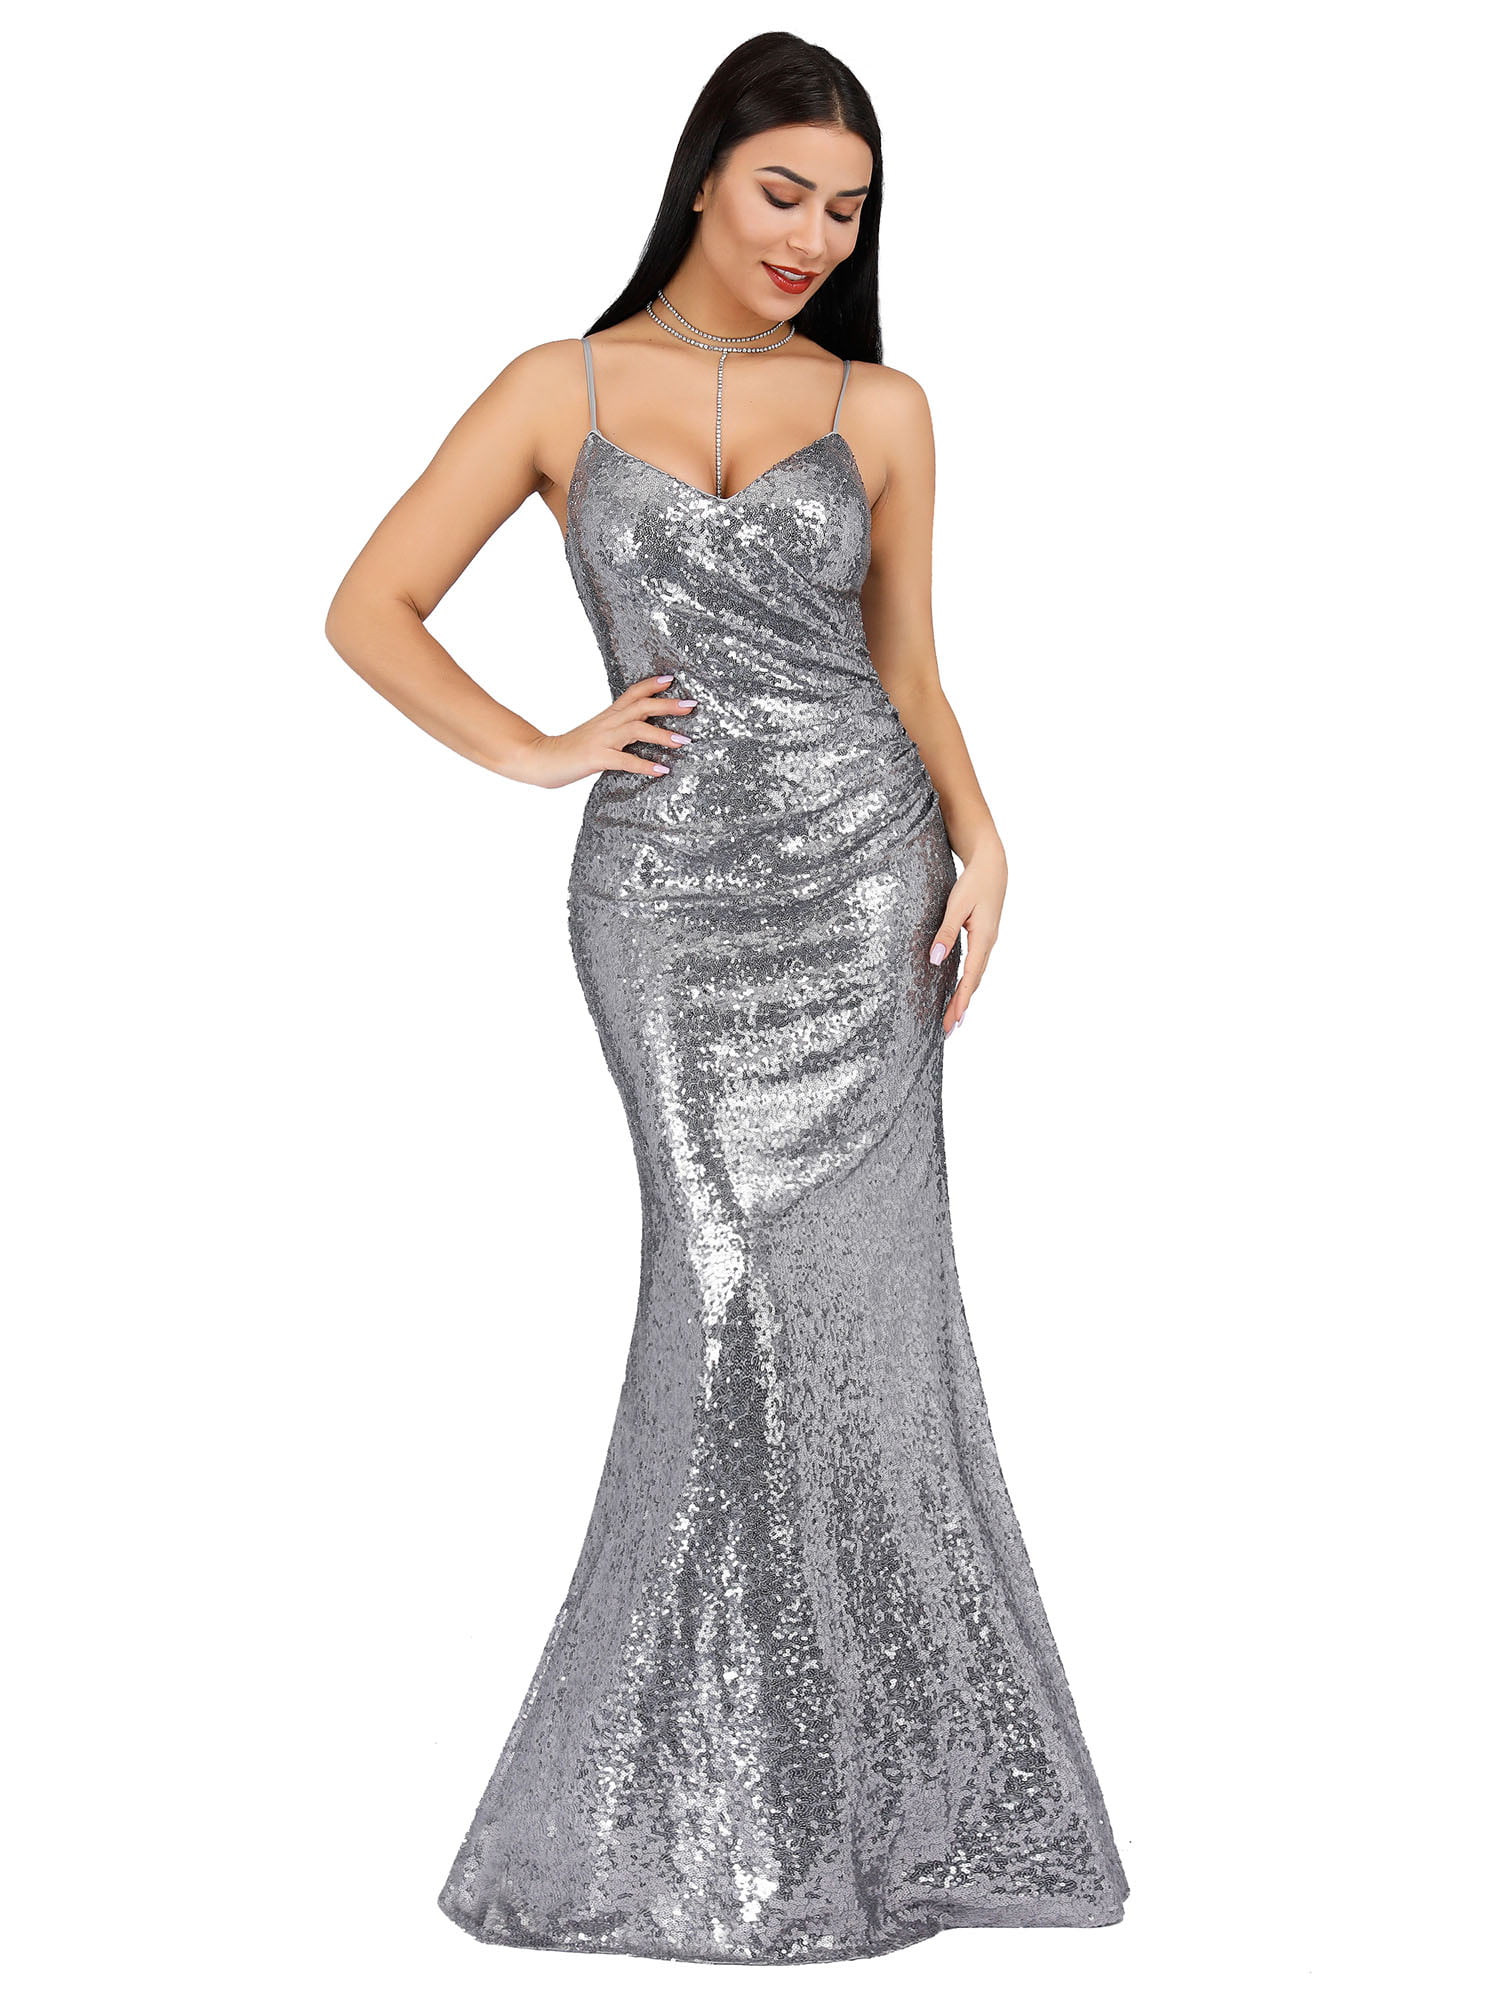 Ever-Pretty Long Strappy Sequins Deep V-neck Ball Prom Gowns Party Dresses 07339 